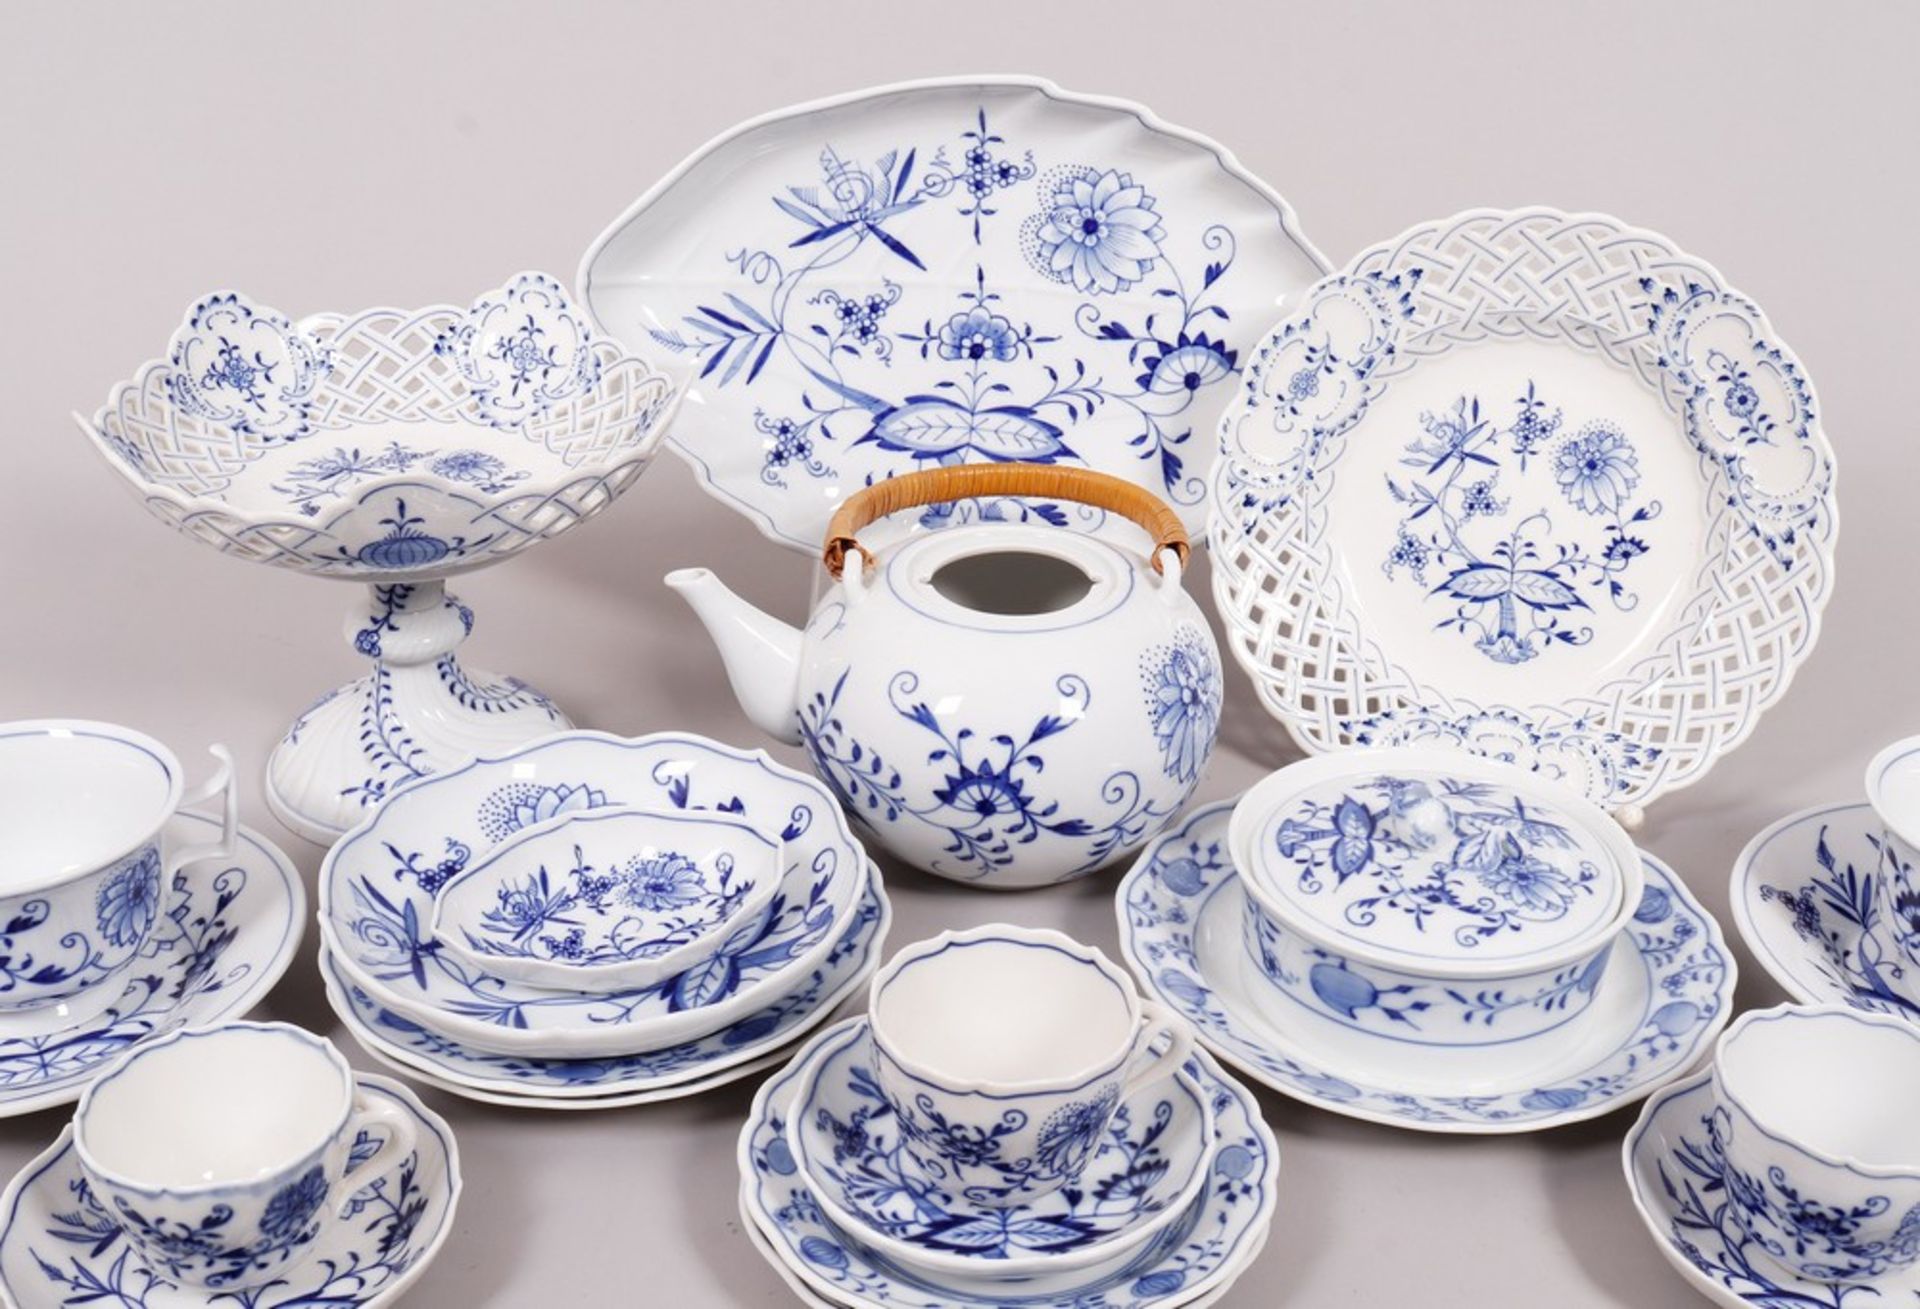 Mixed lot of porcelain, Meissen, decor "onion pattern", 20th C./some c. 1900 - Image 2 of 11